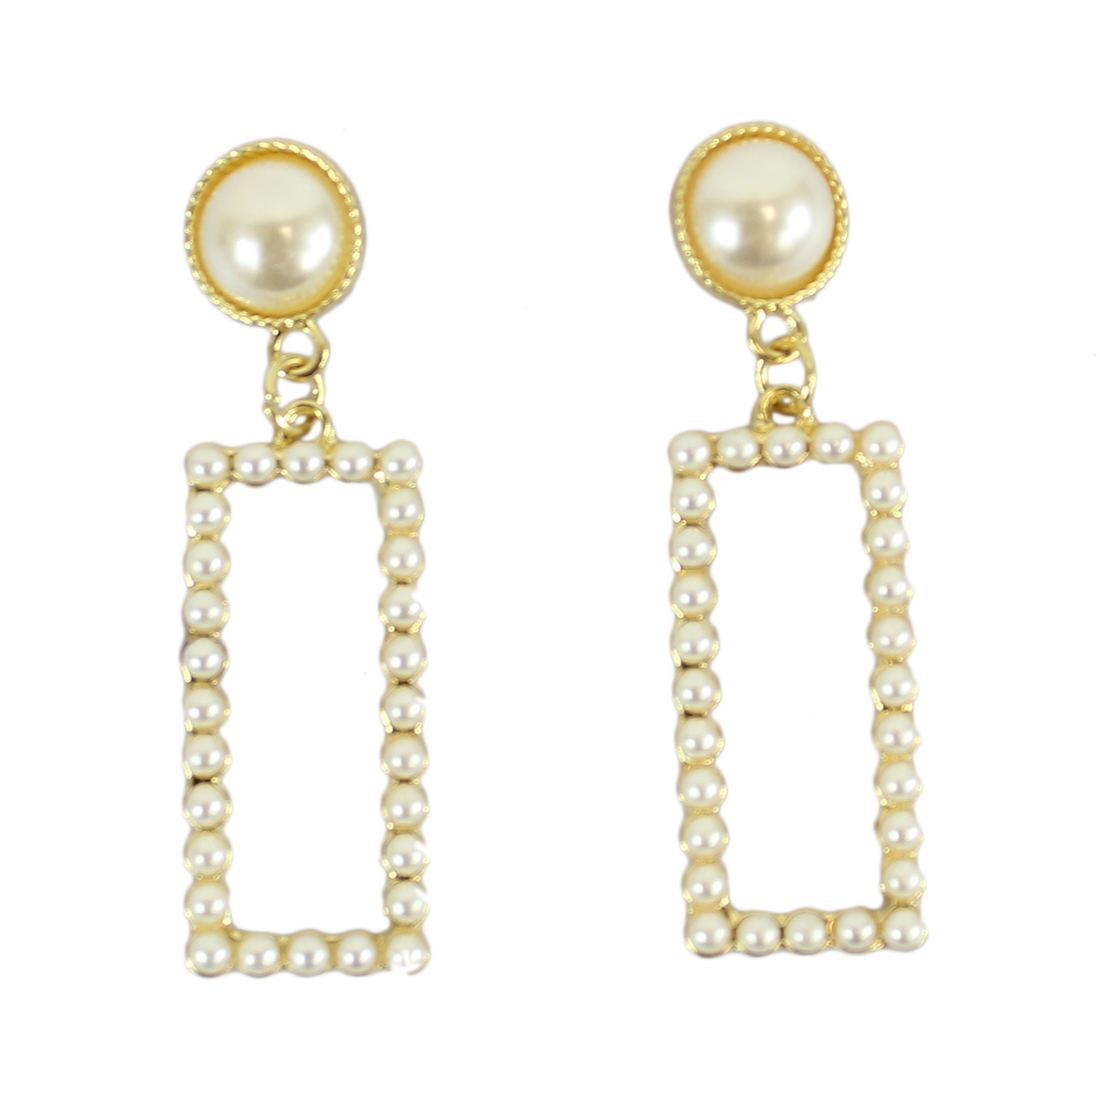 Dangle earrings with tiny pearls